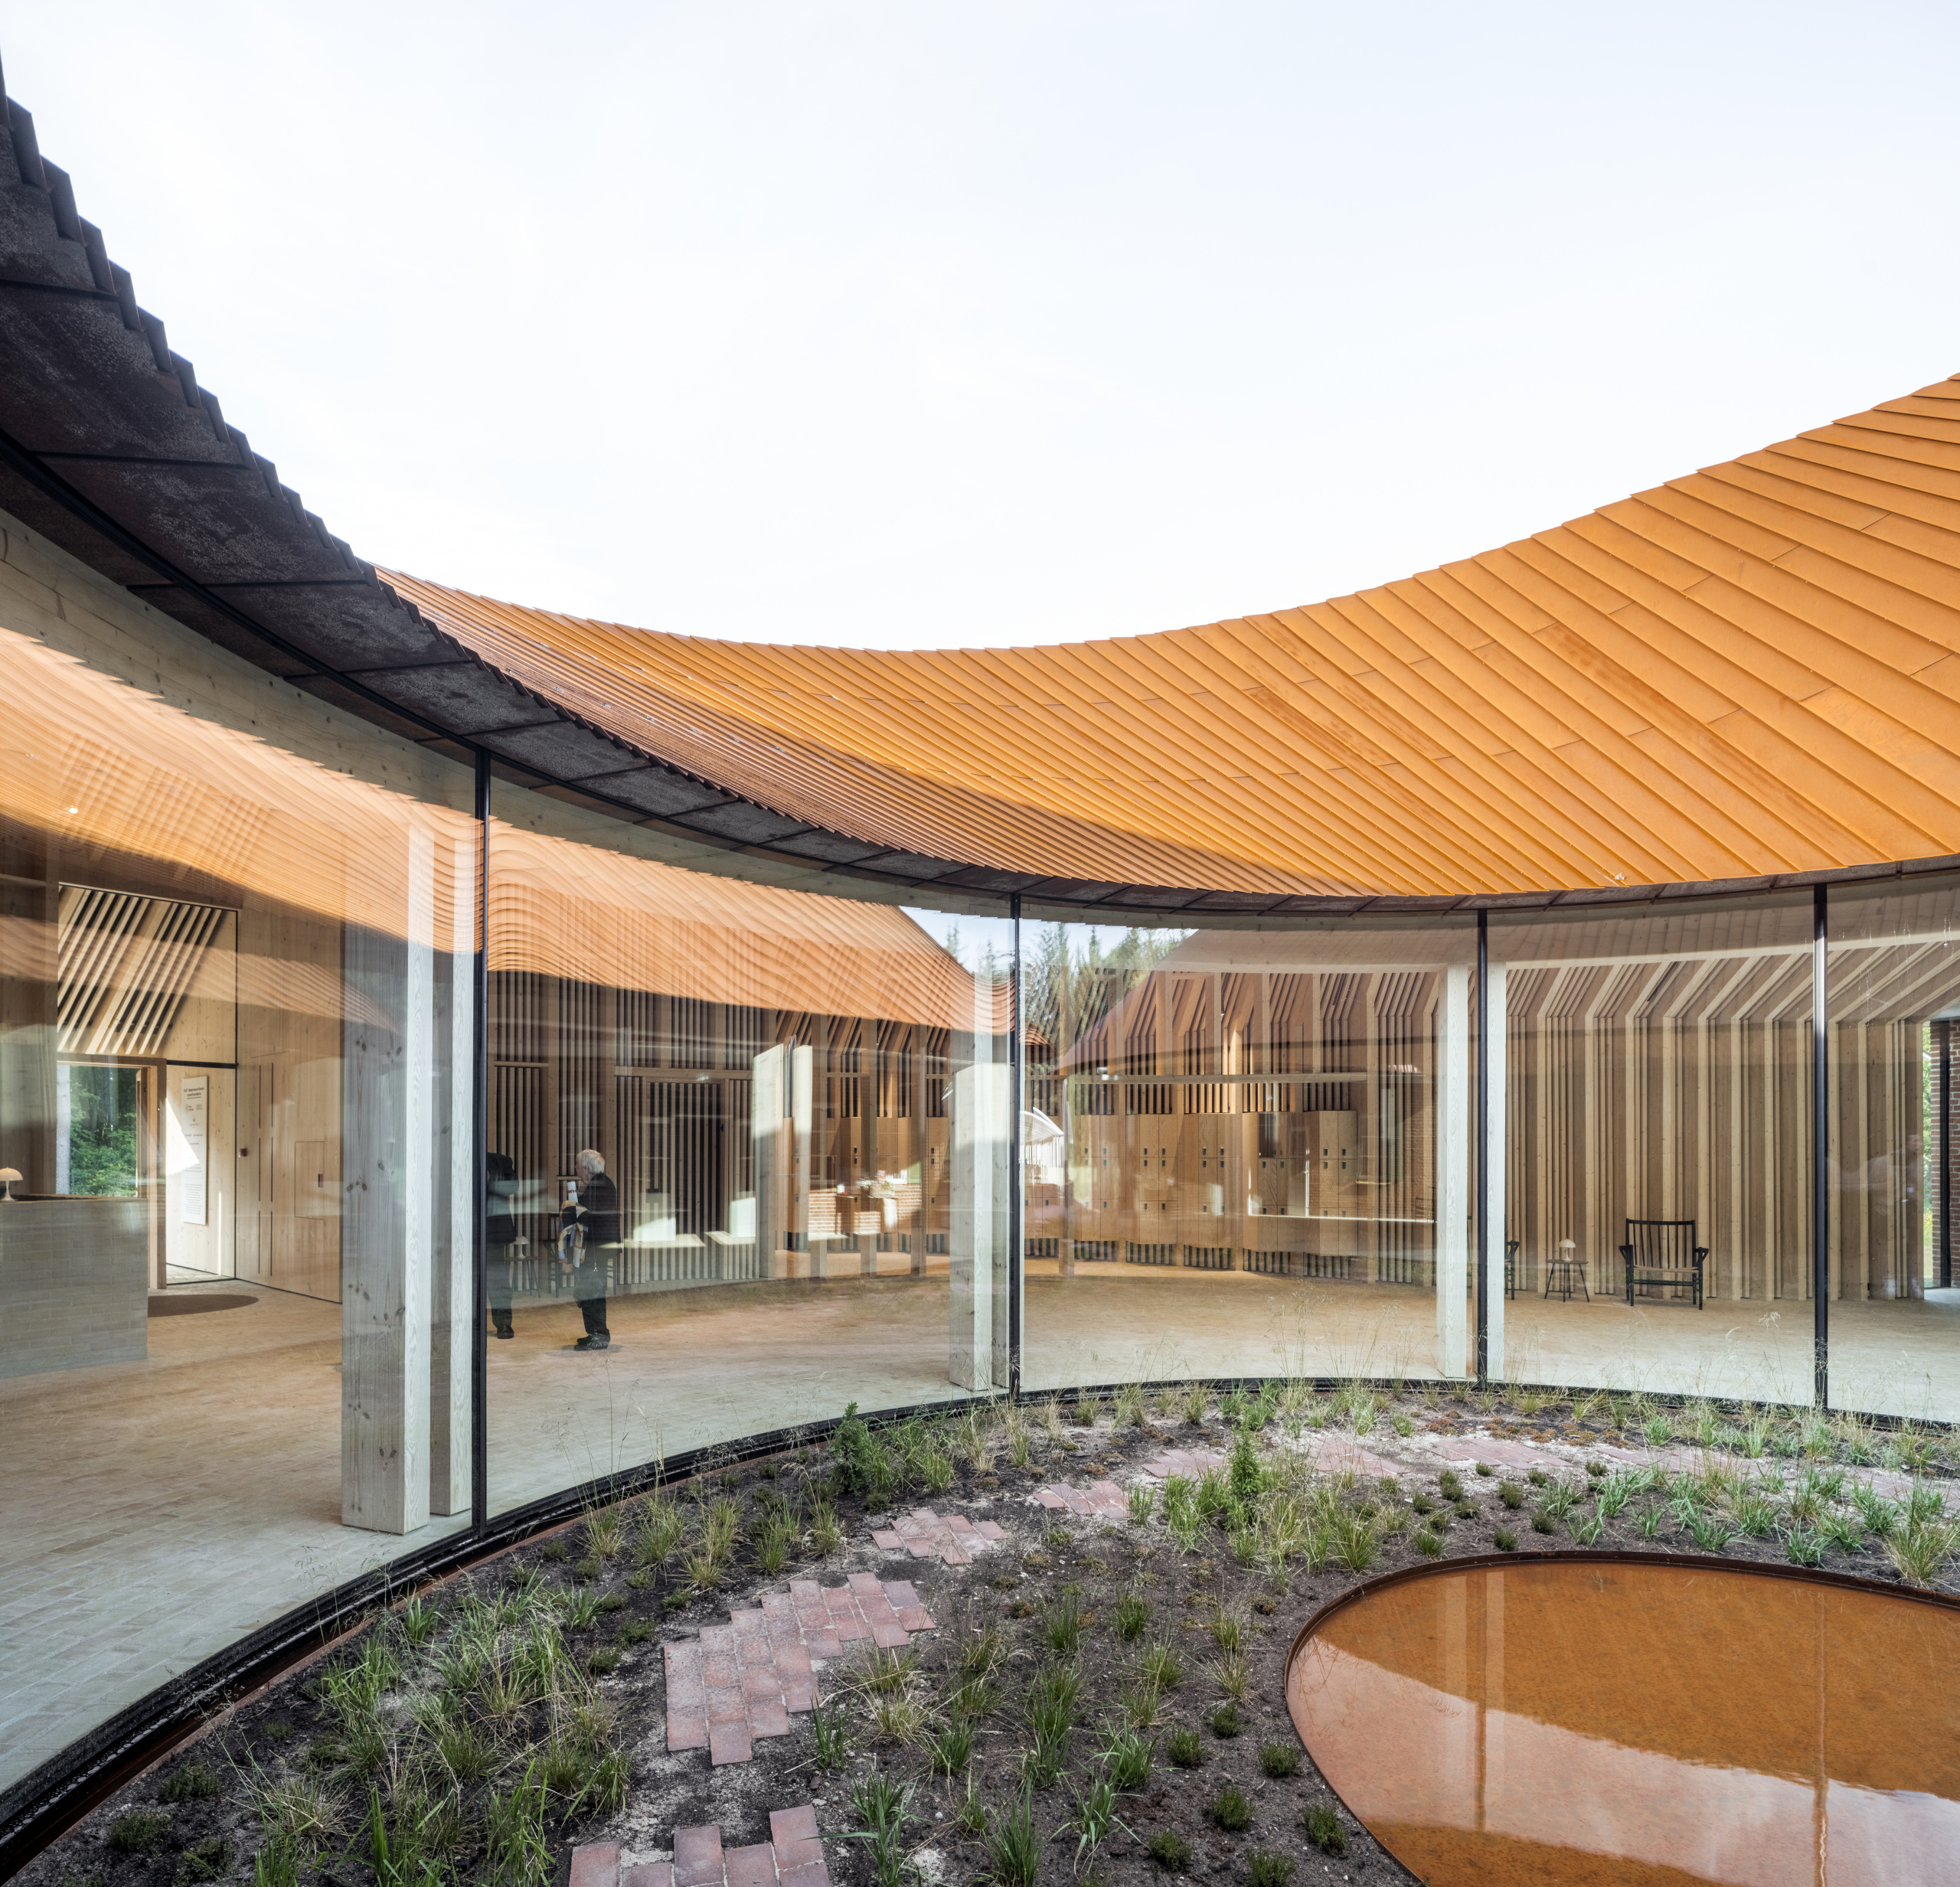 a curving timber structure surrounding a circular courtyard with reflecting pool